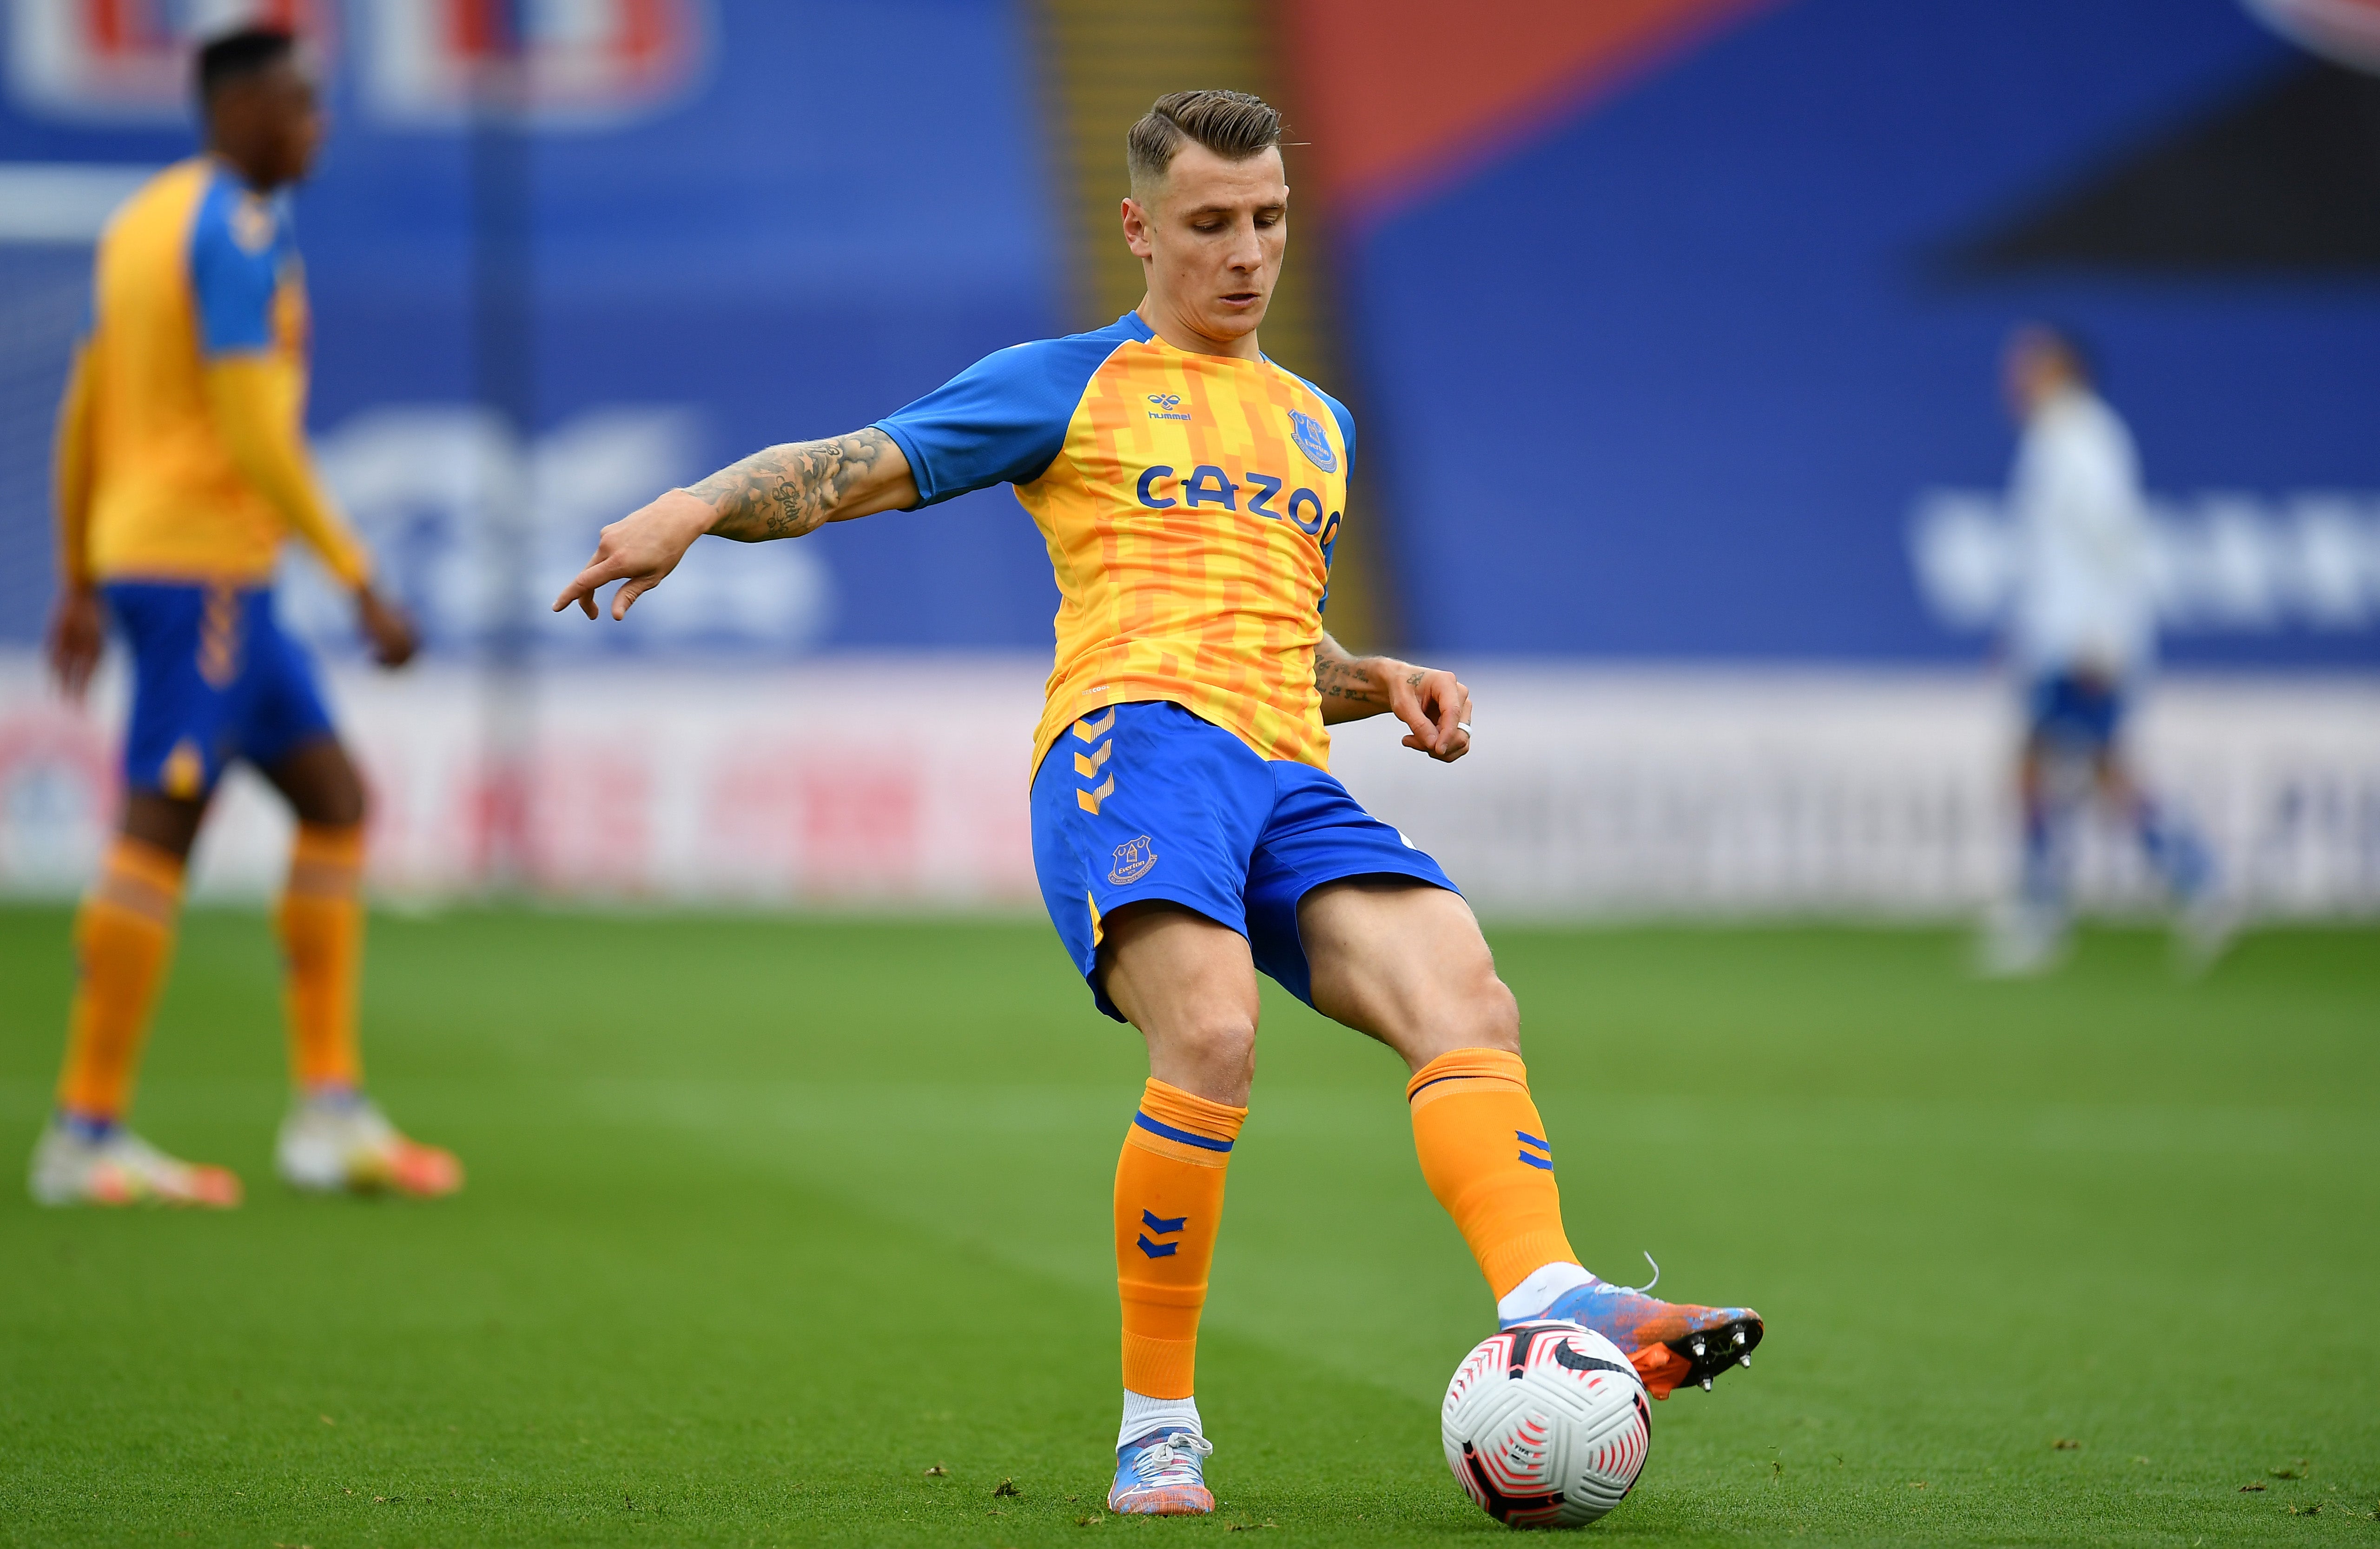 Lucas Digne warms up before kick-off in south London